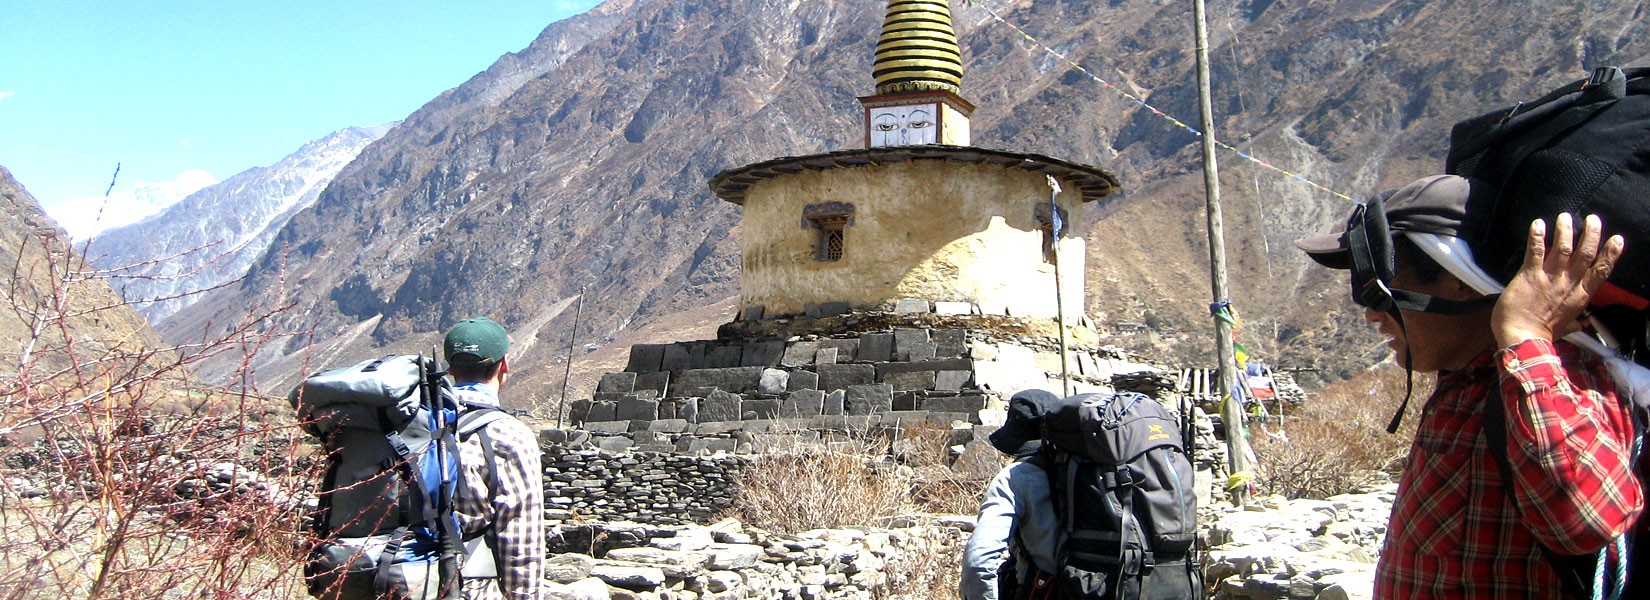 A religious shrine in Tsum Valley